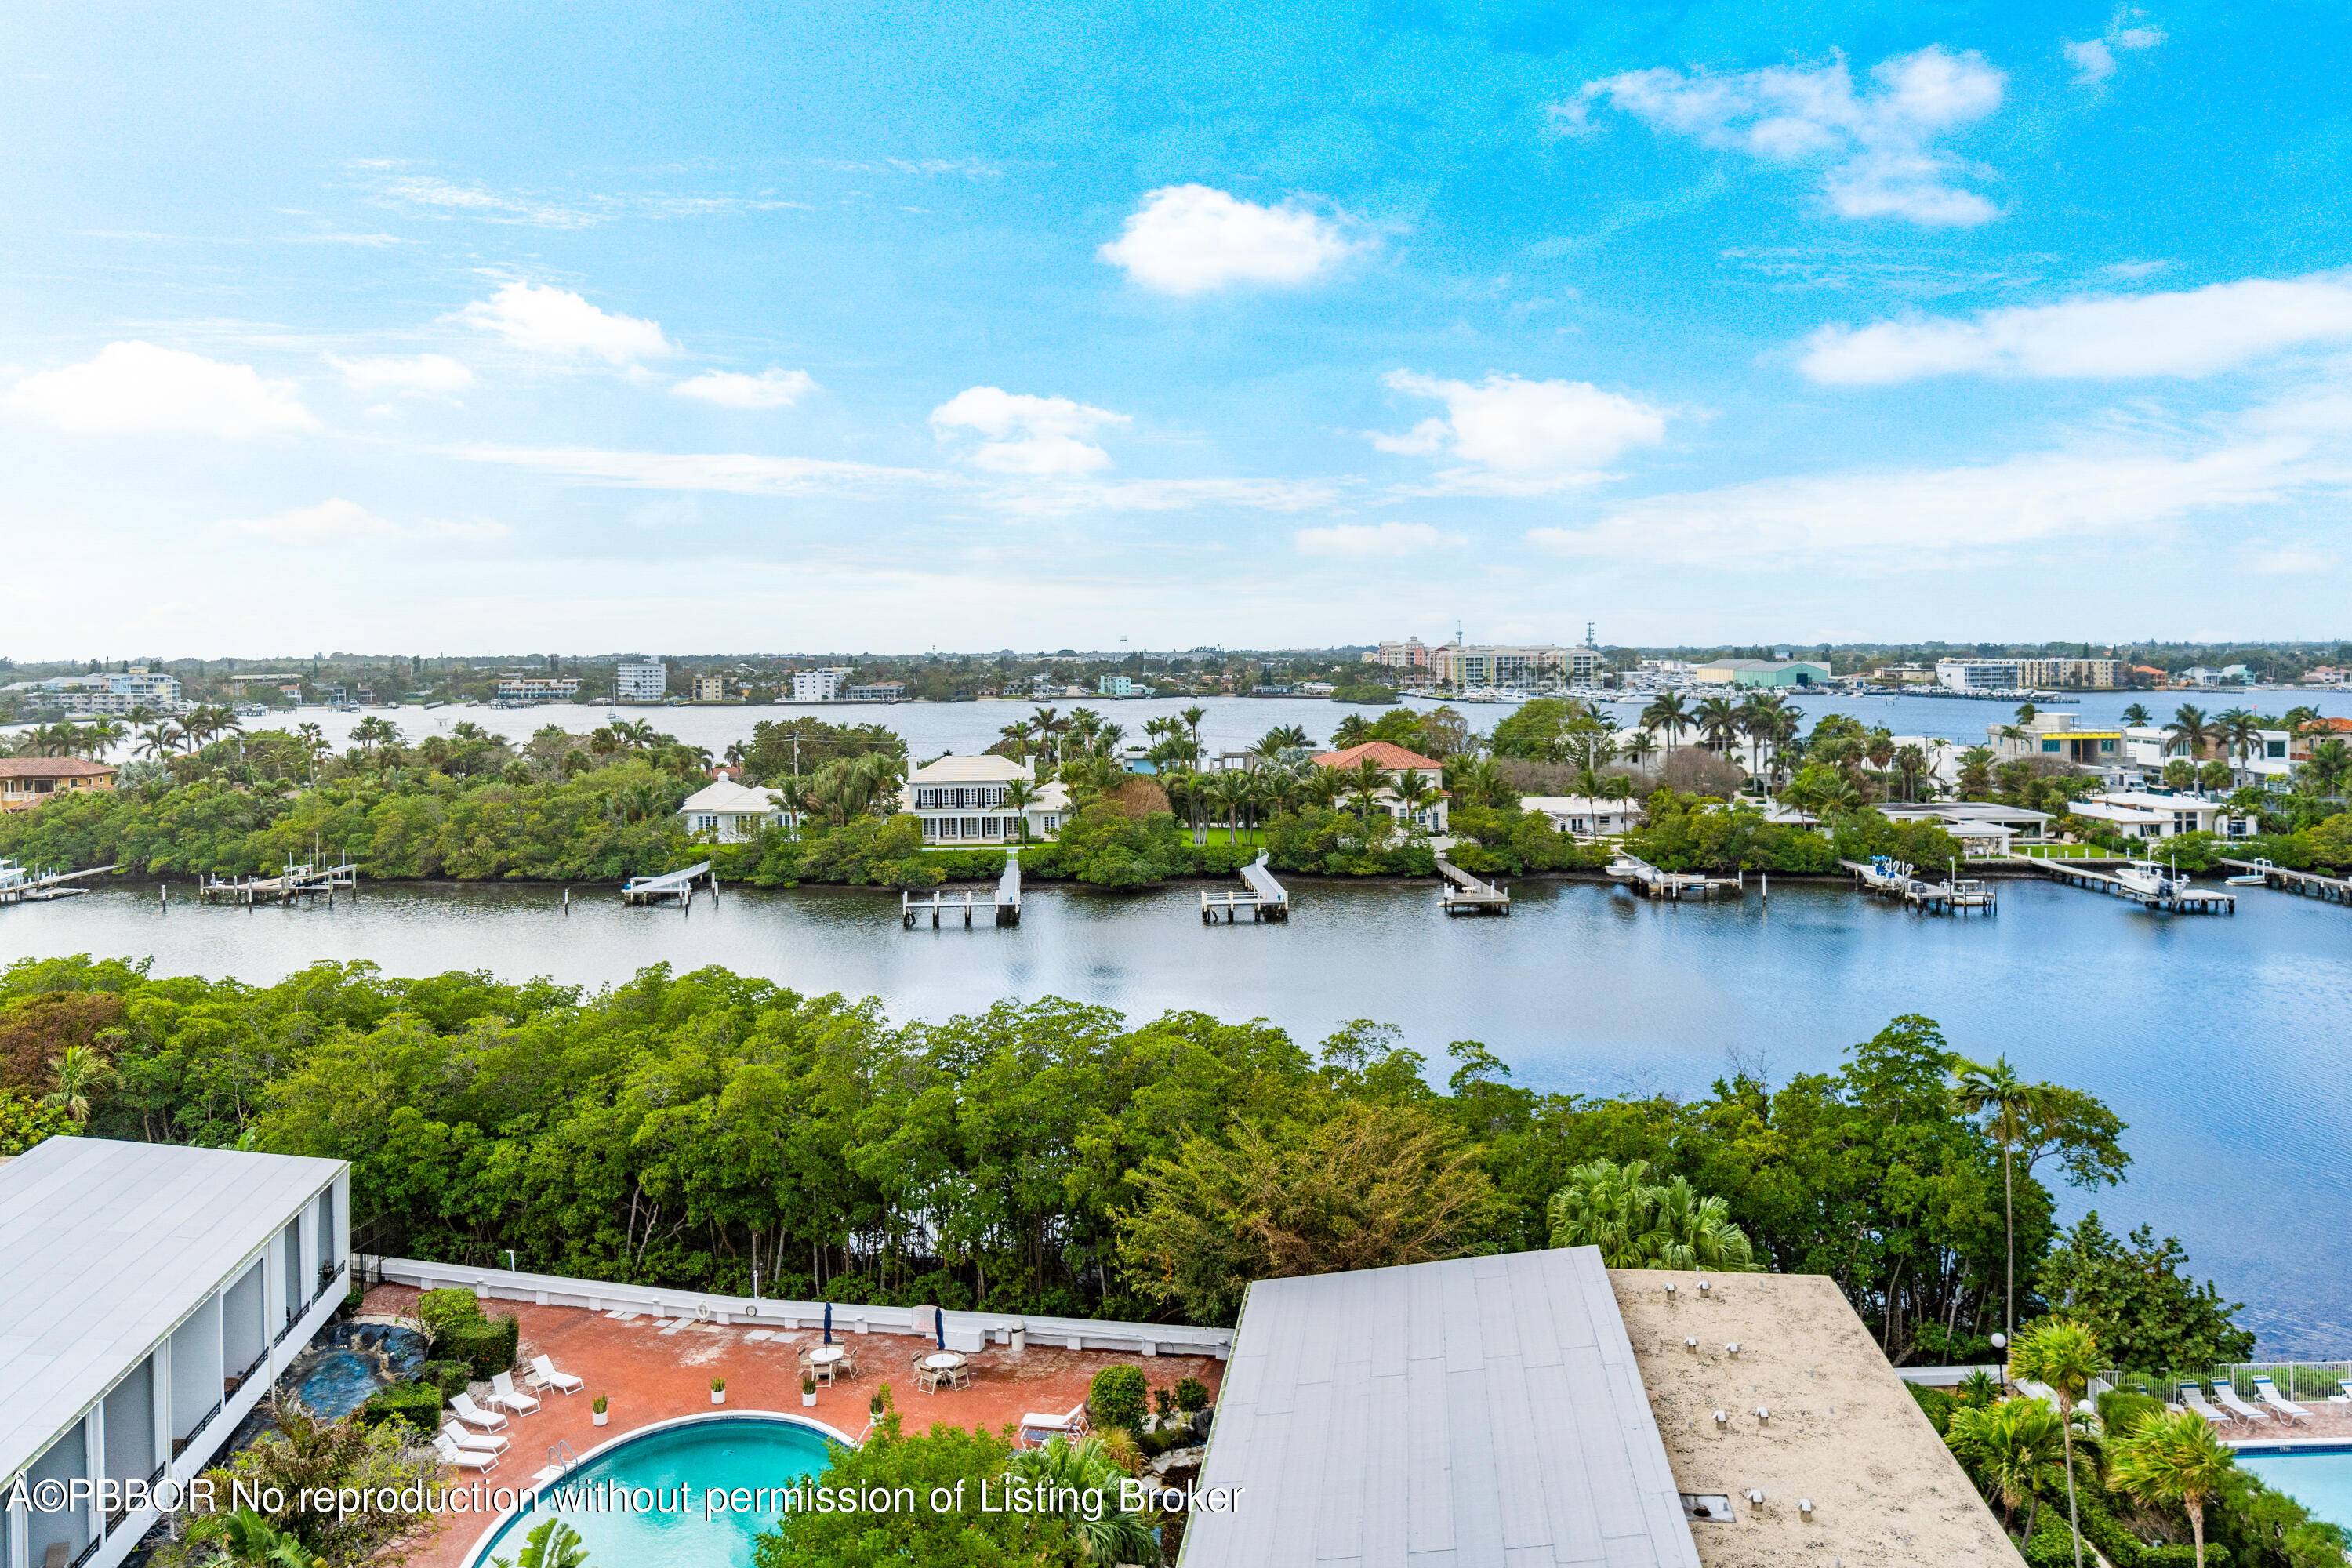 Indulge in the captivating Intracoastal vistas from every corner of this expansive two bedroom, two bathroom Mayfair Lake Penthouse.